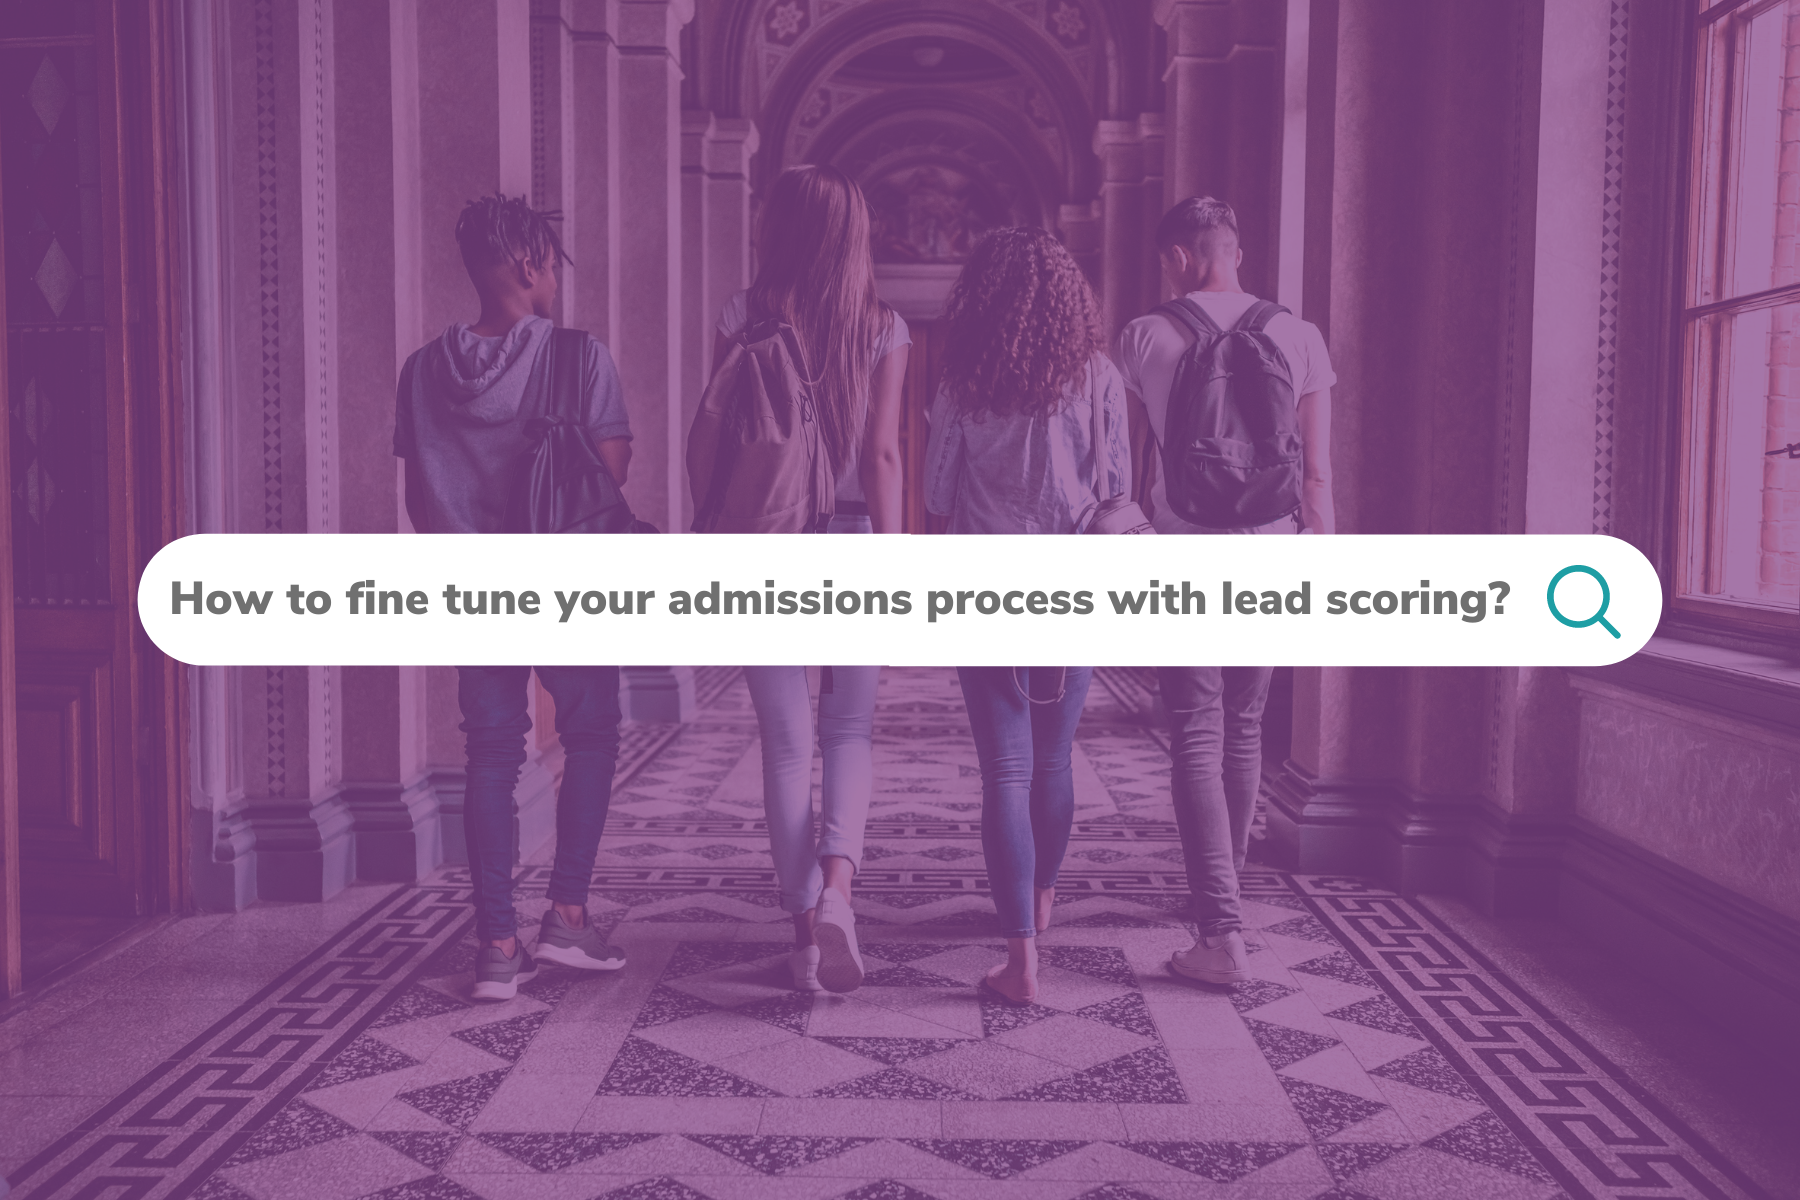 How to fine tune your admissions process with lead scoring?